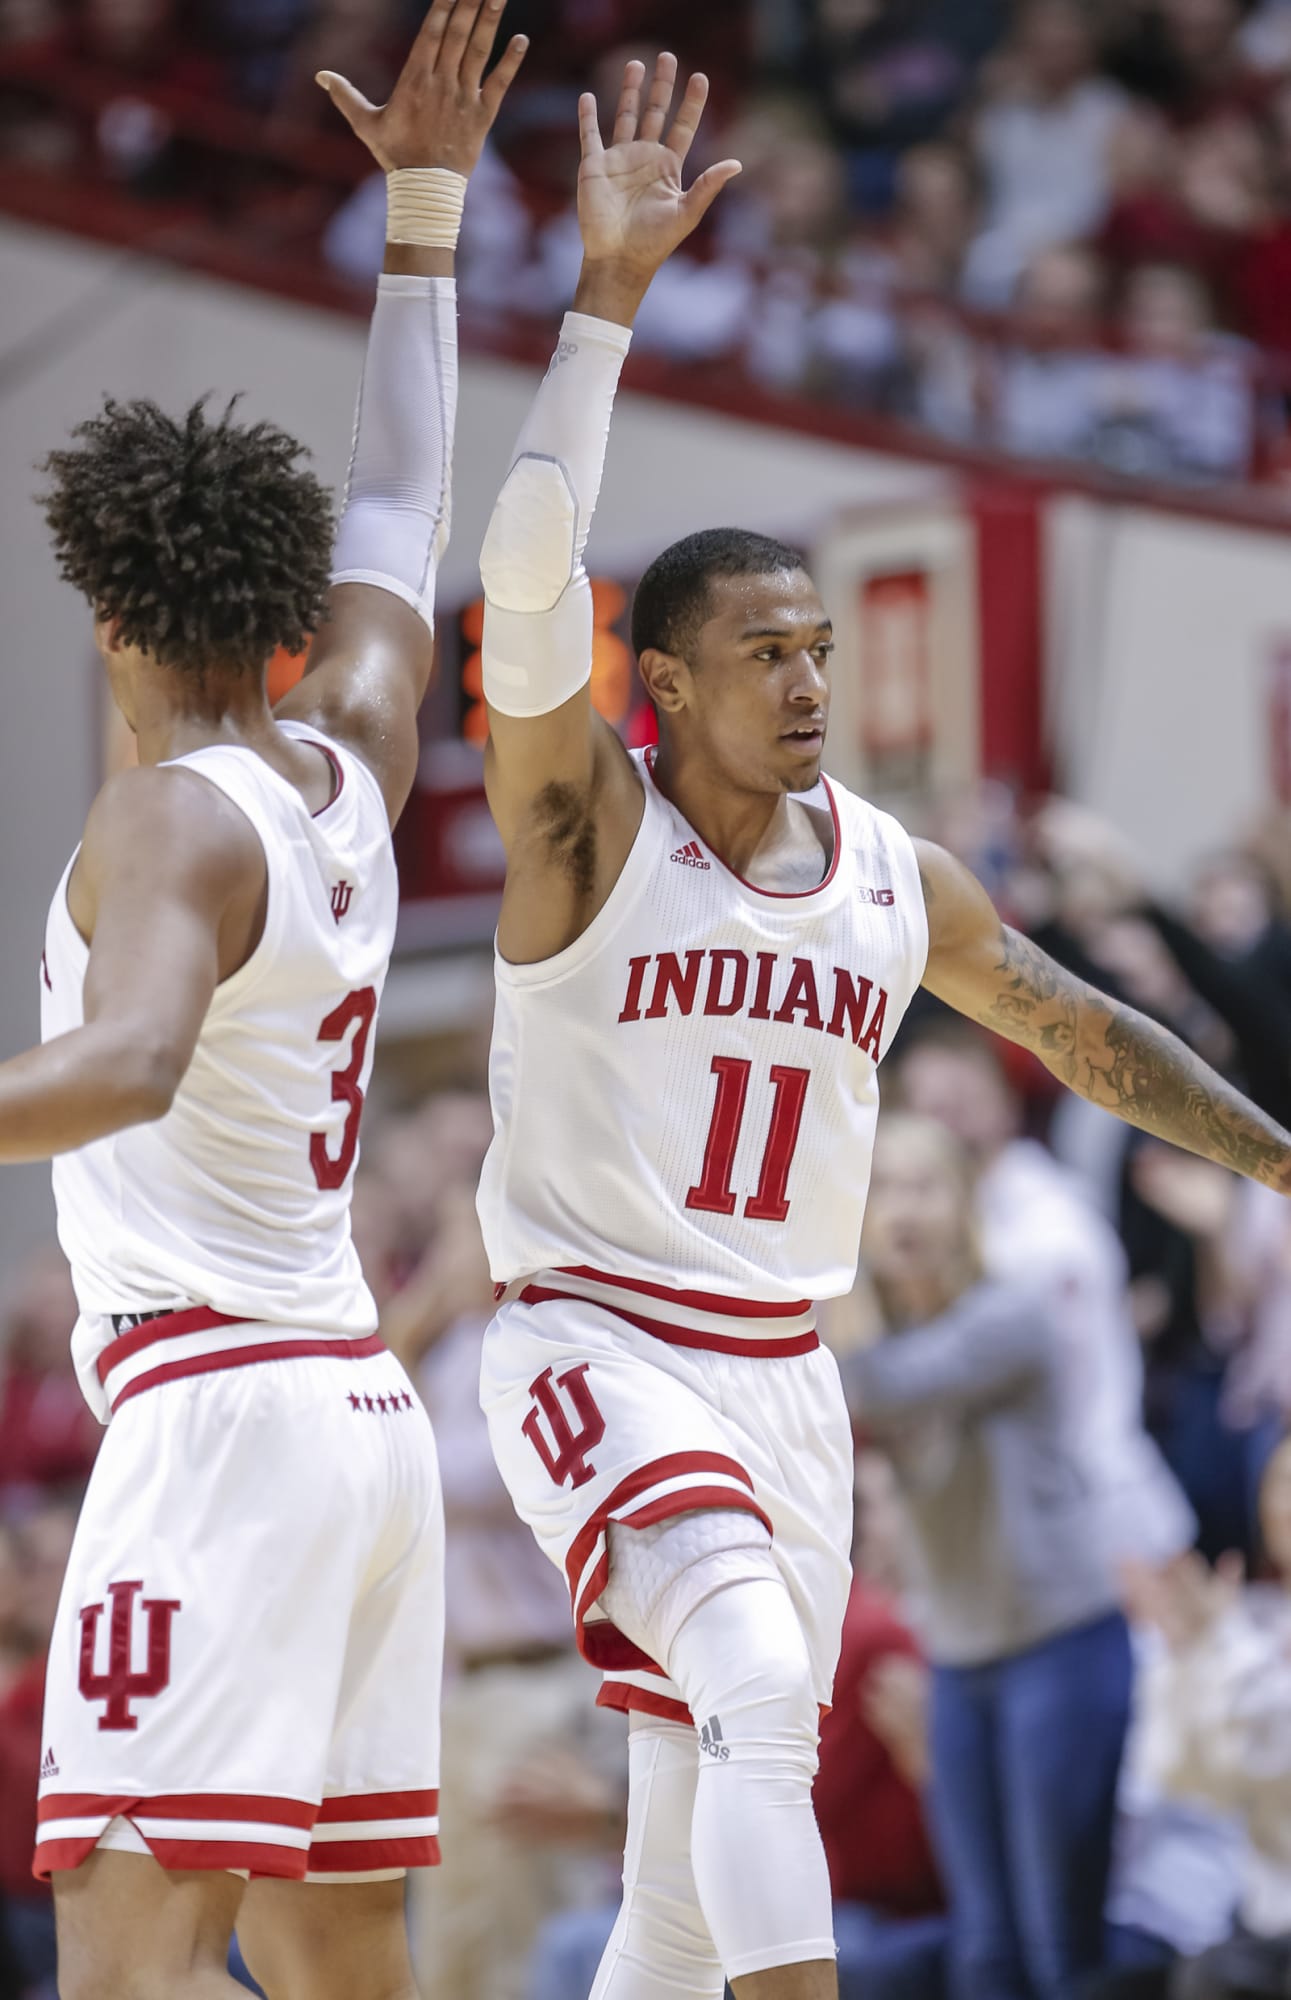 Indiana Basketball Hoosiers Advance To The Nit Quarterfinals With Win